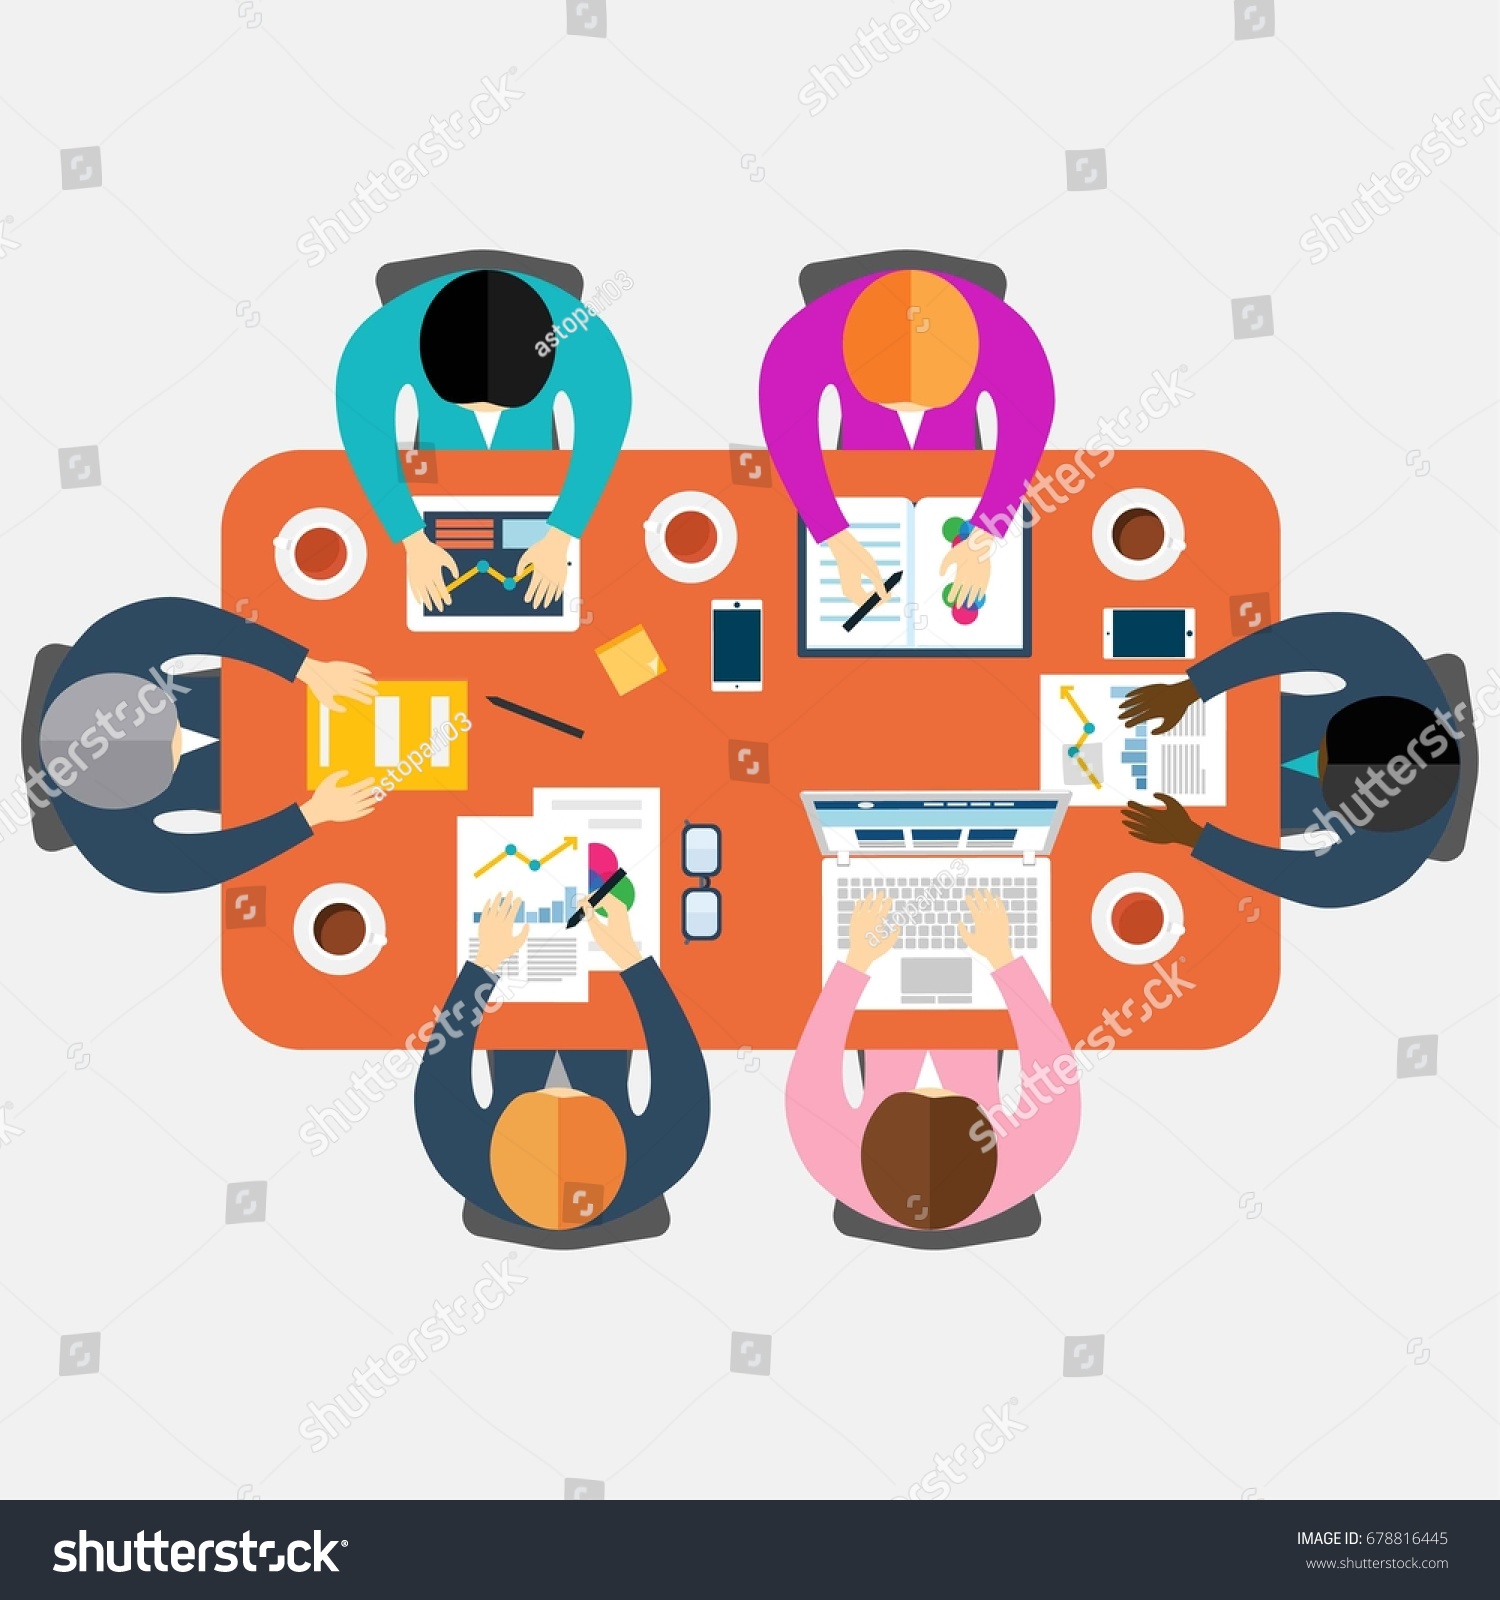 Group Discussion Stock Vector Royalty Free 678816445